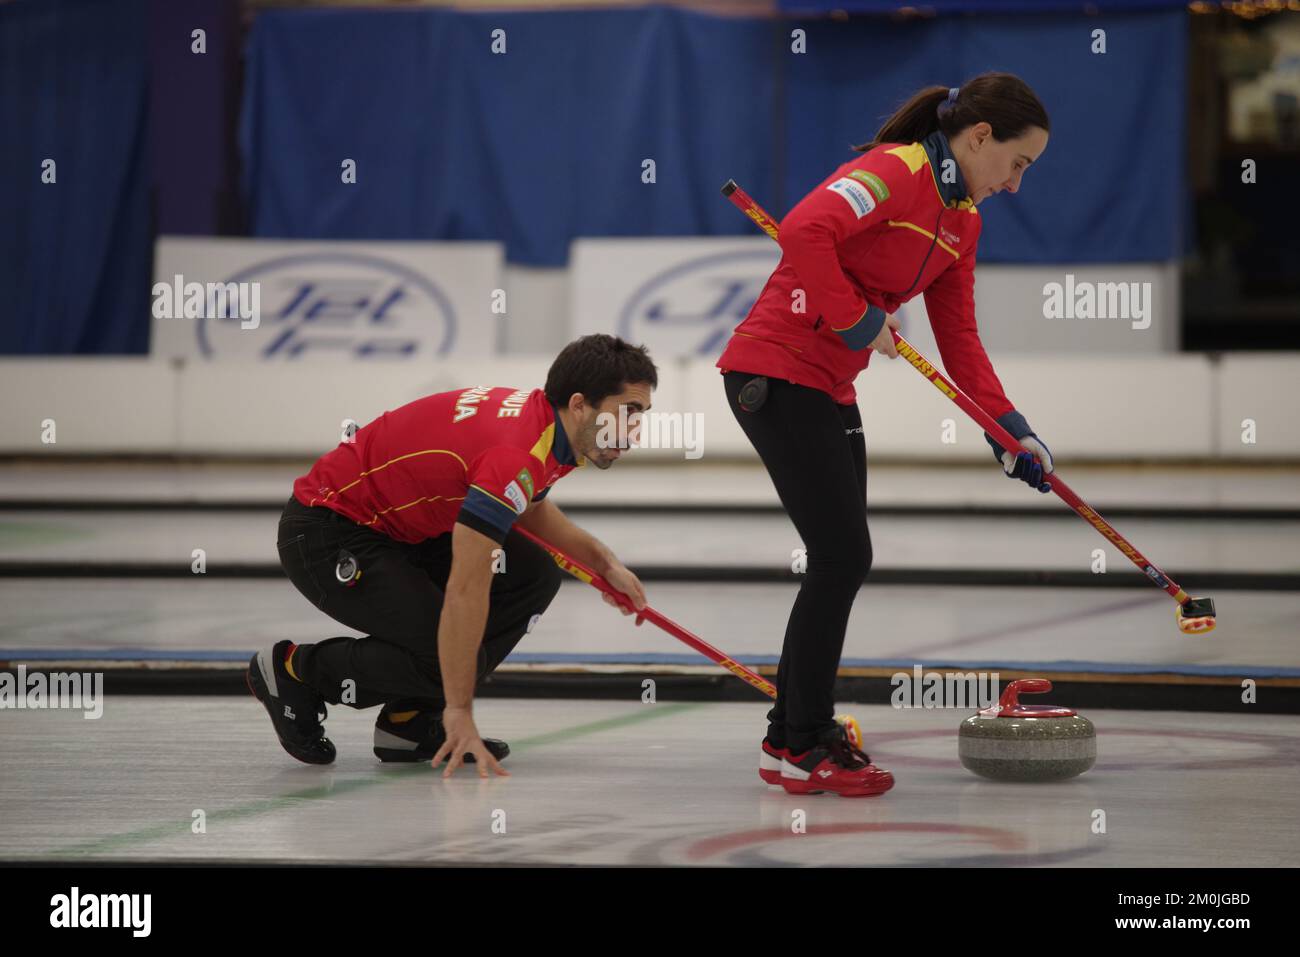 Dumfries, Scotland, 6 December 2022. Mikel Unanue and Oihane Otaegi playing  for Spain in the World Mixed Doubles Qualification Event 2022 at Dumfries  Ice Bowl. Credit: Colin Edwards/Alamy Live News Stock Photo - Alamy